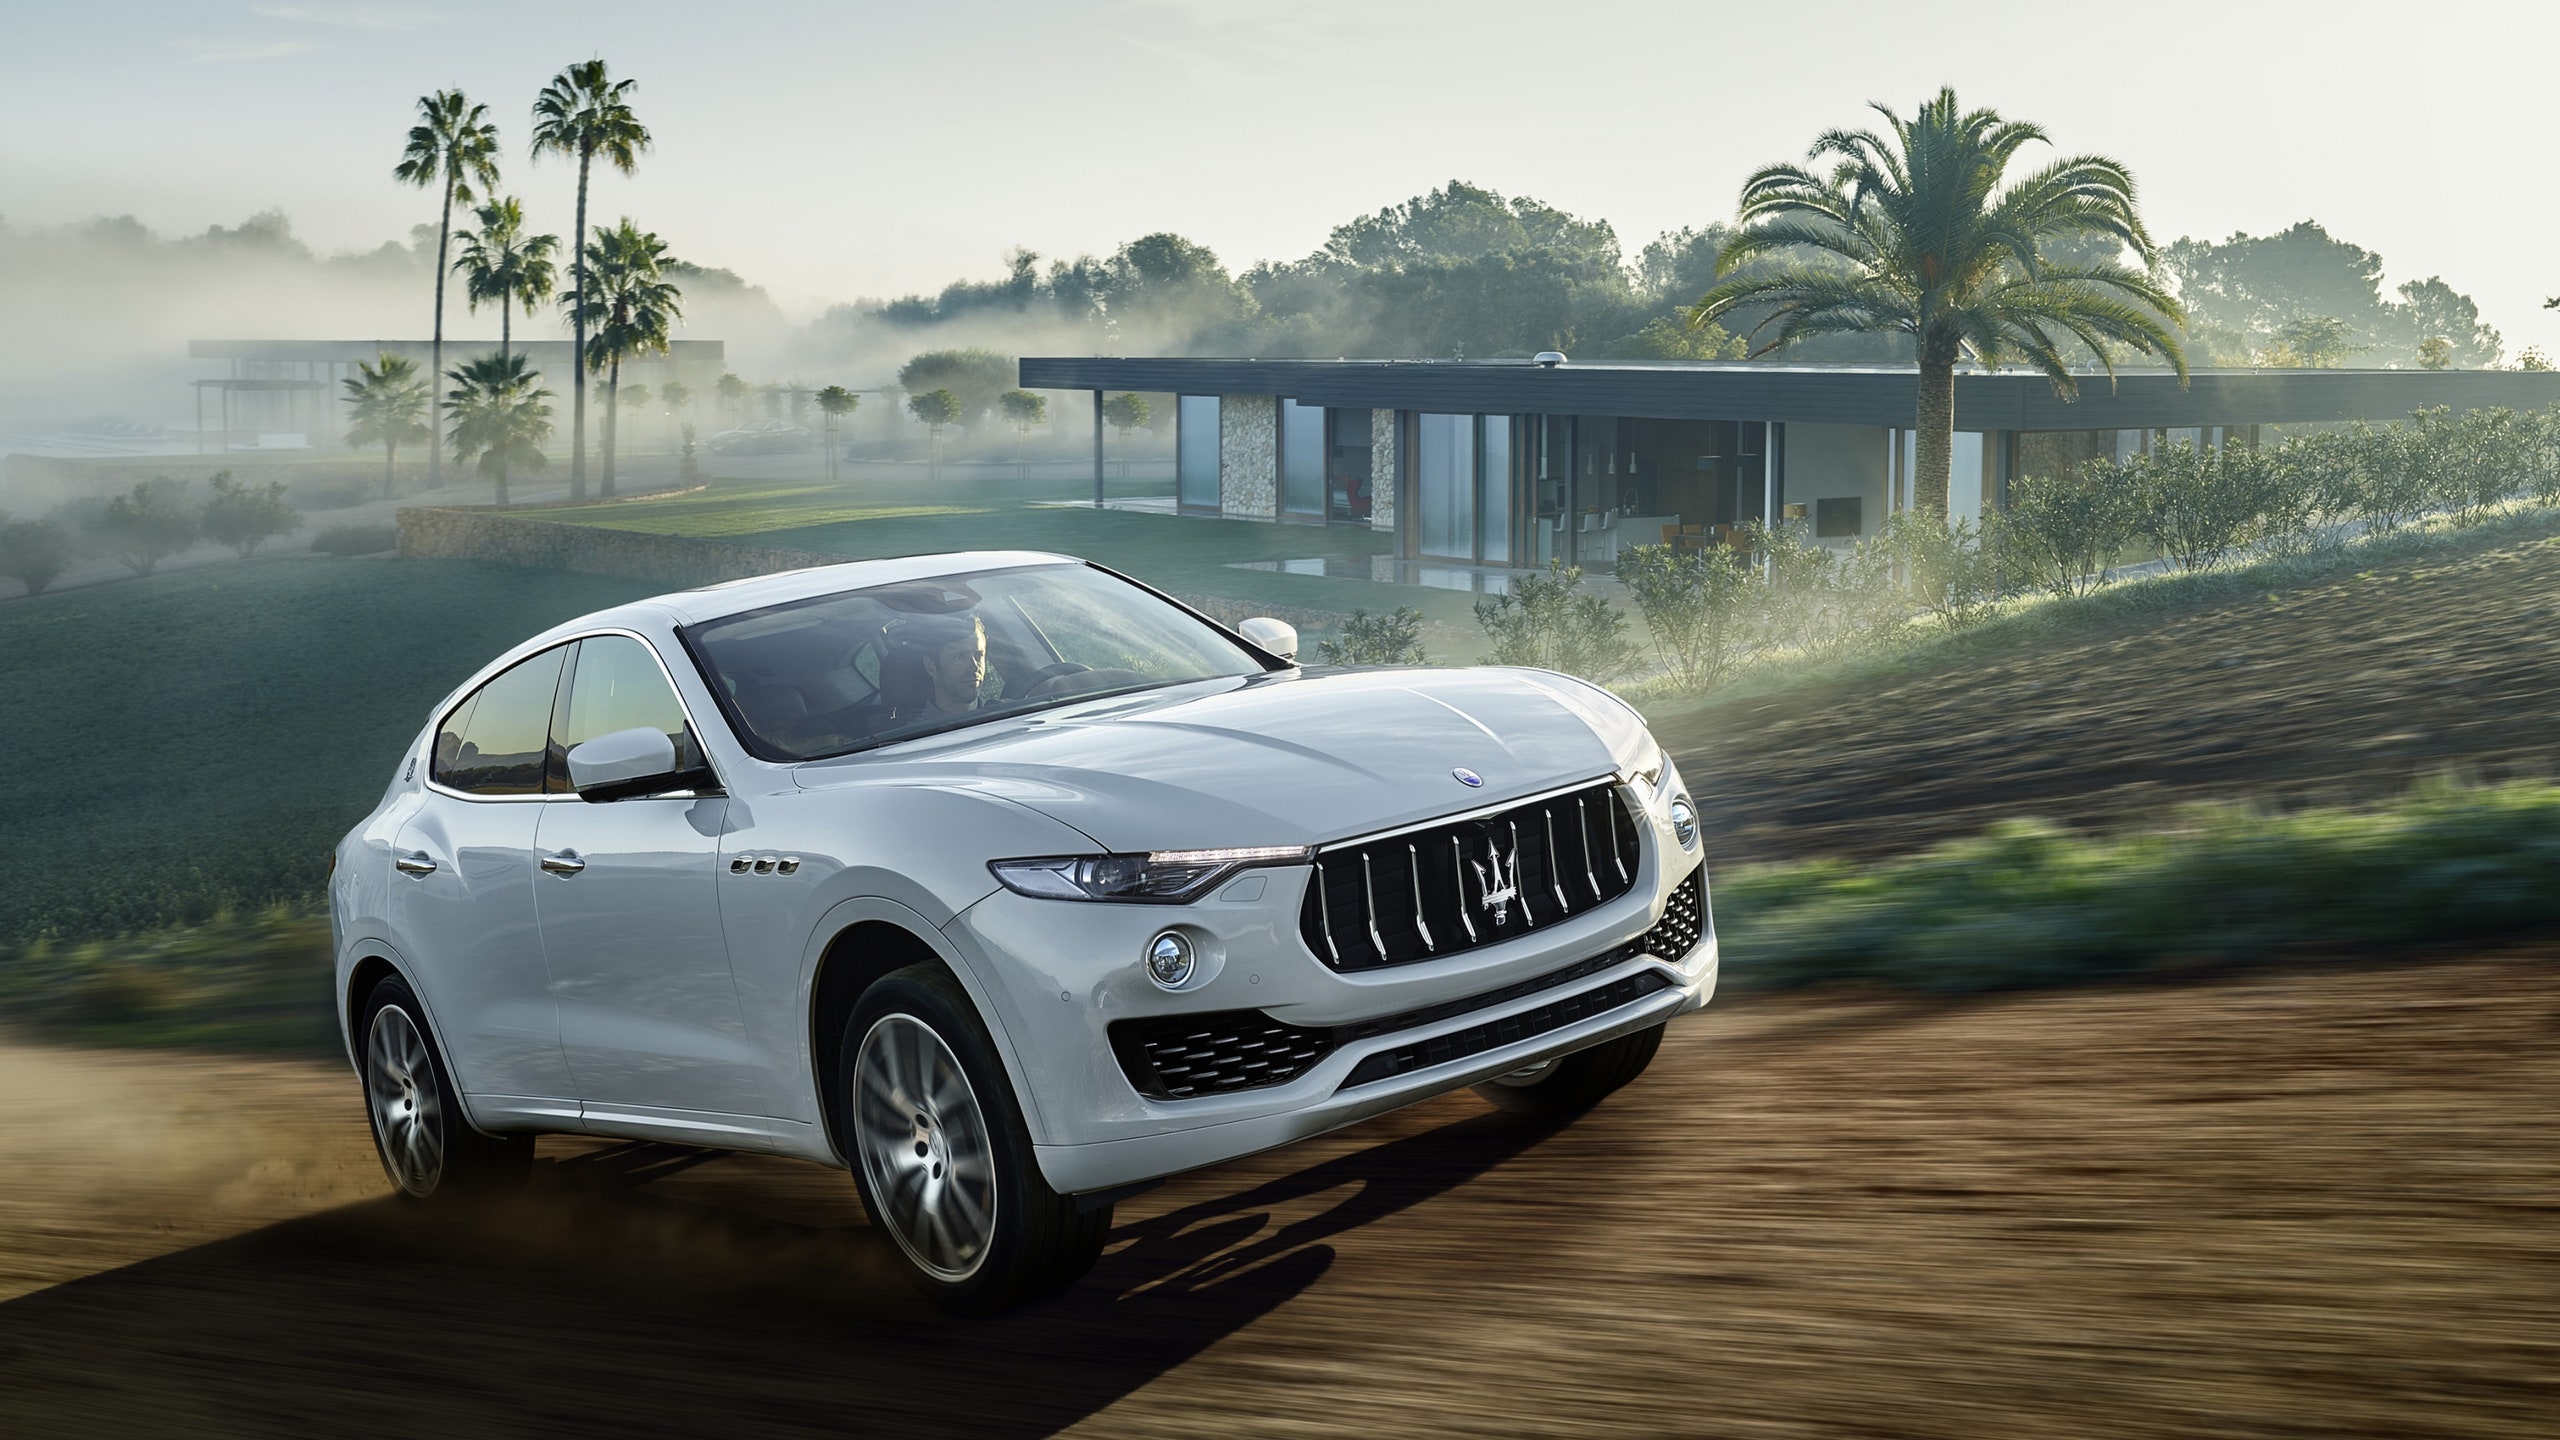 AD Test-Drives the All-New 2017 Maserati Levante SUV | Architectural Digest